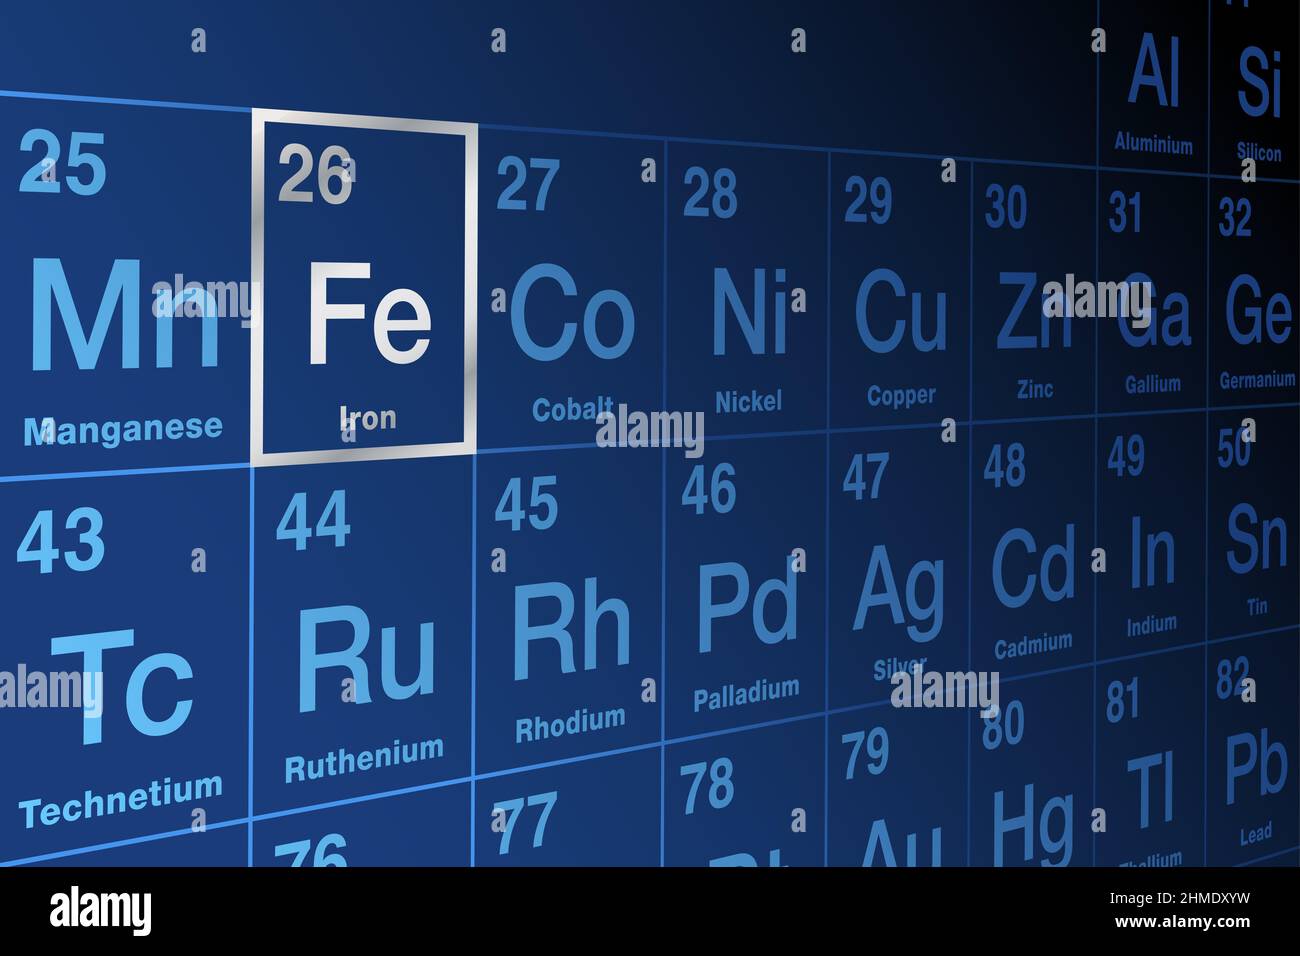 Element iron on the periodic table of elements. Ferromagnetic transition metal, with the element symbol Fe from Latin ferrum, and atomic number 26. Stock Photo